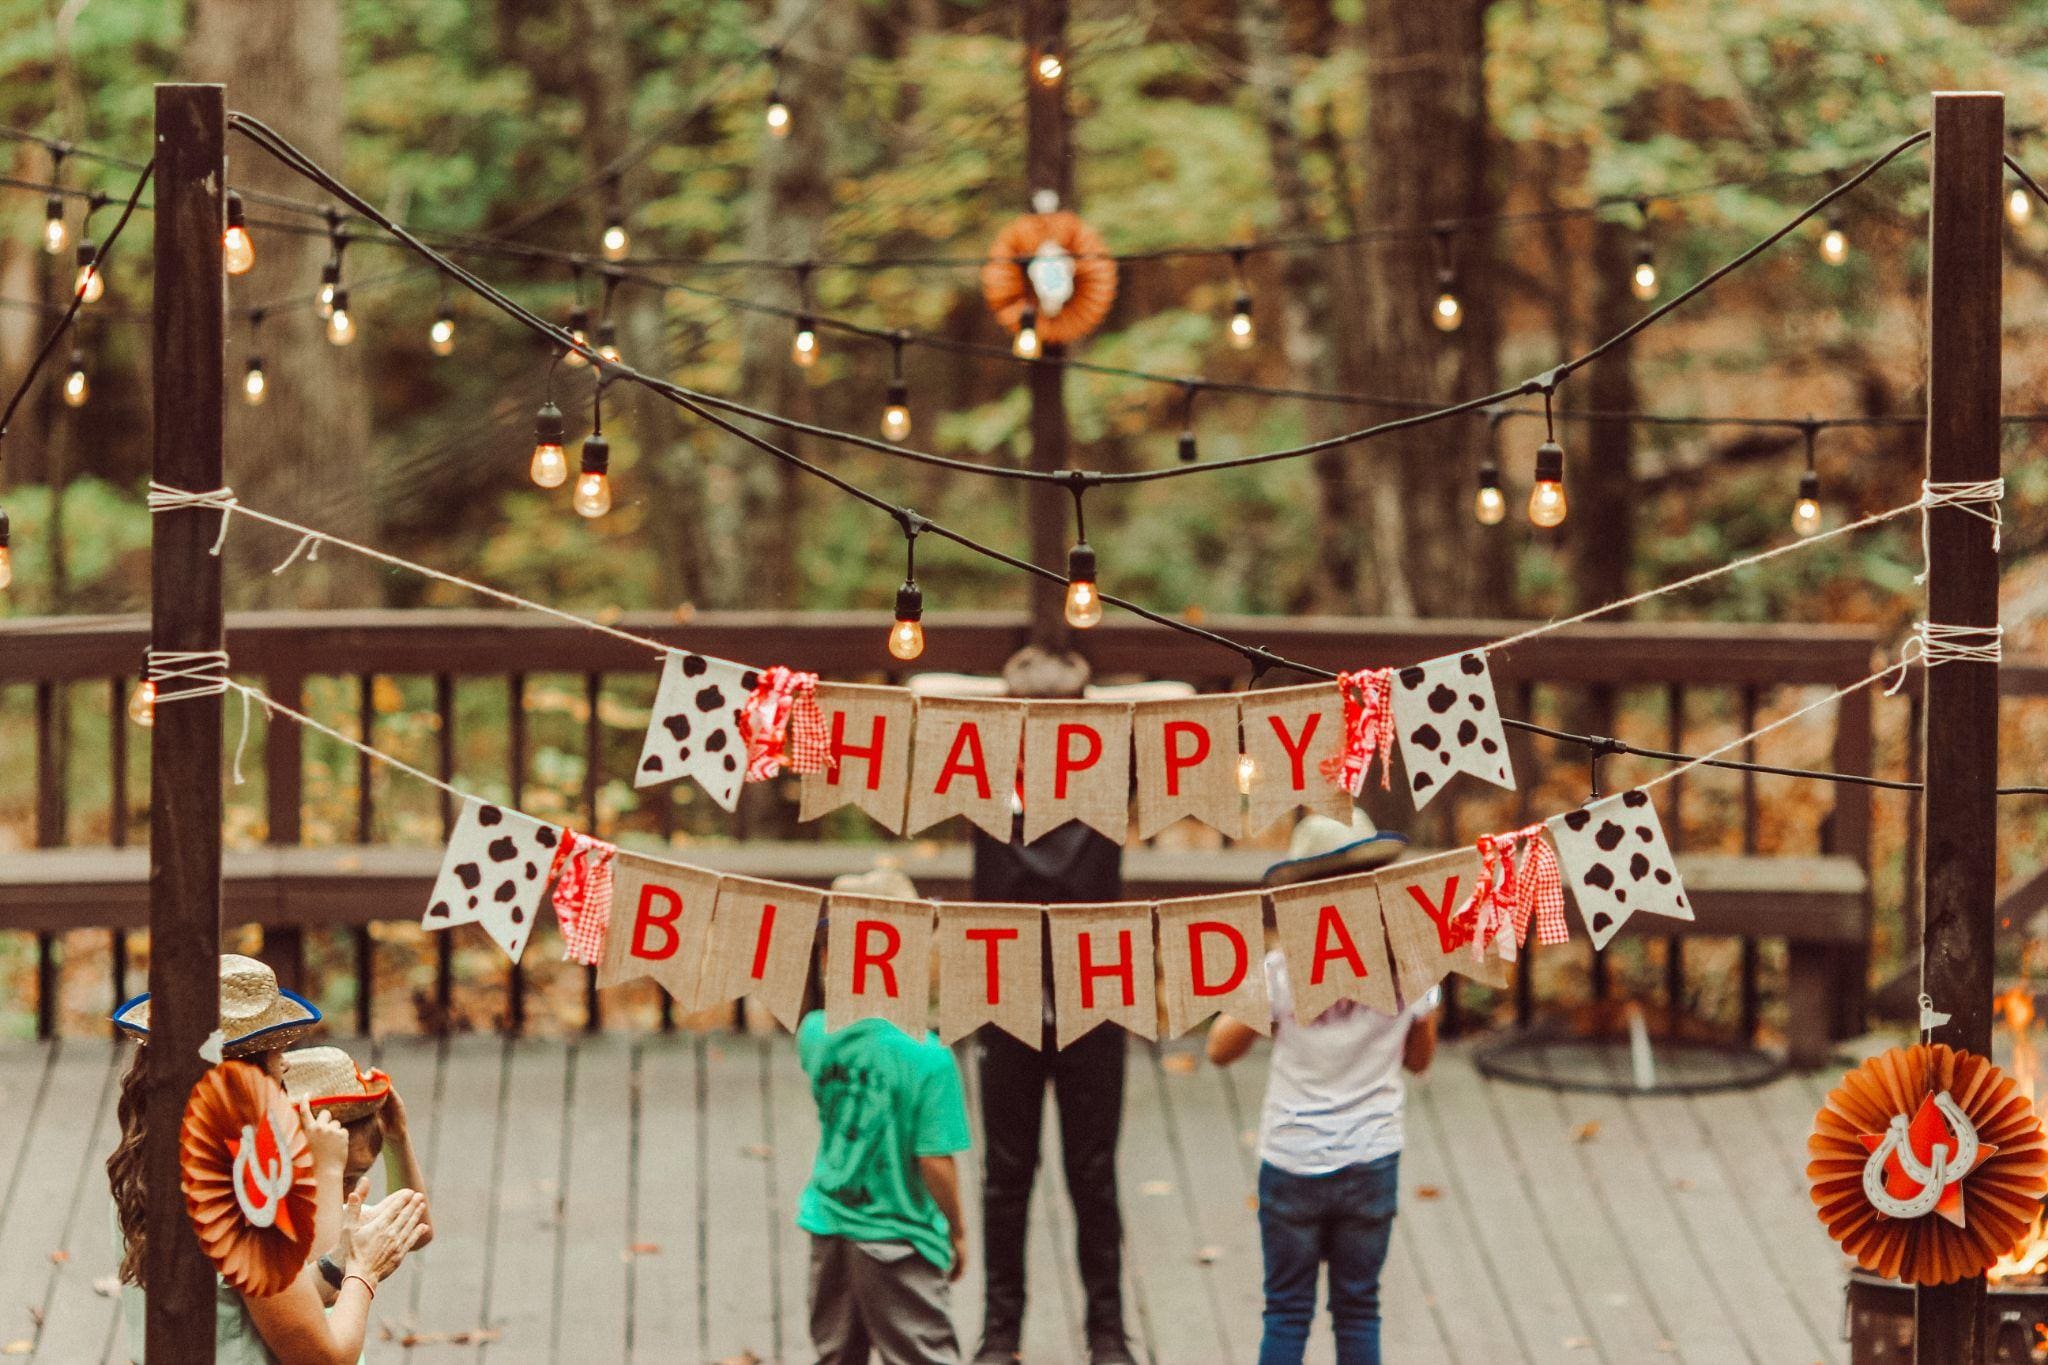 happy birthday outdoor banner sign on wooden deck string lights